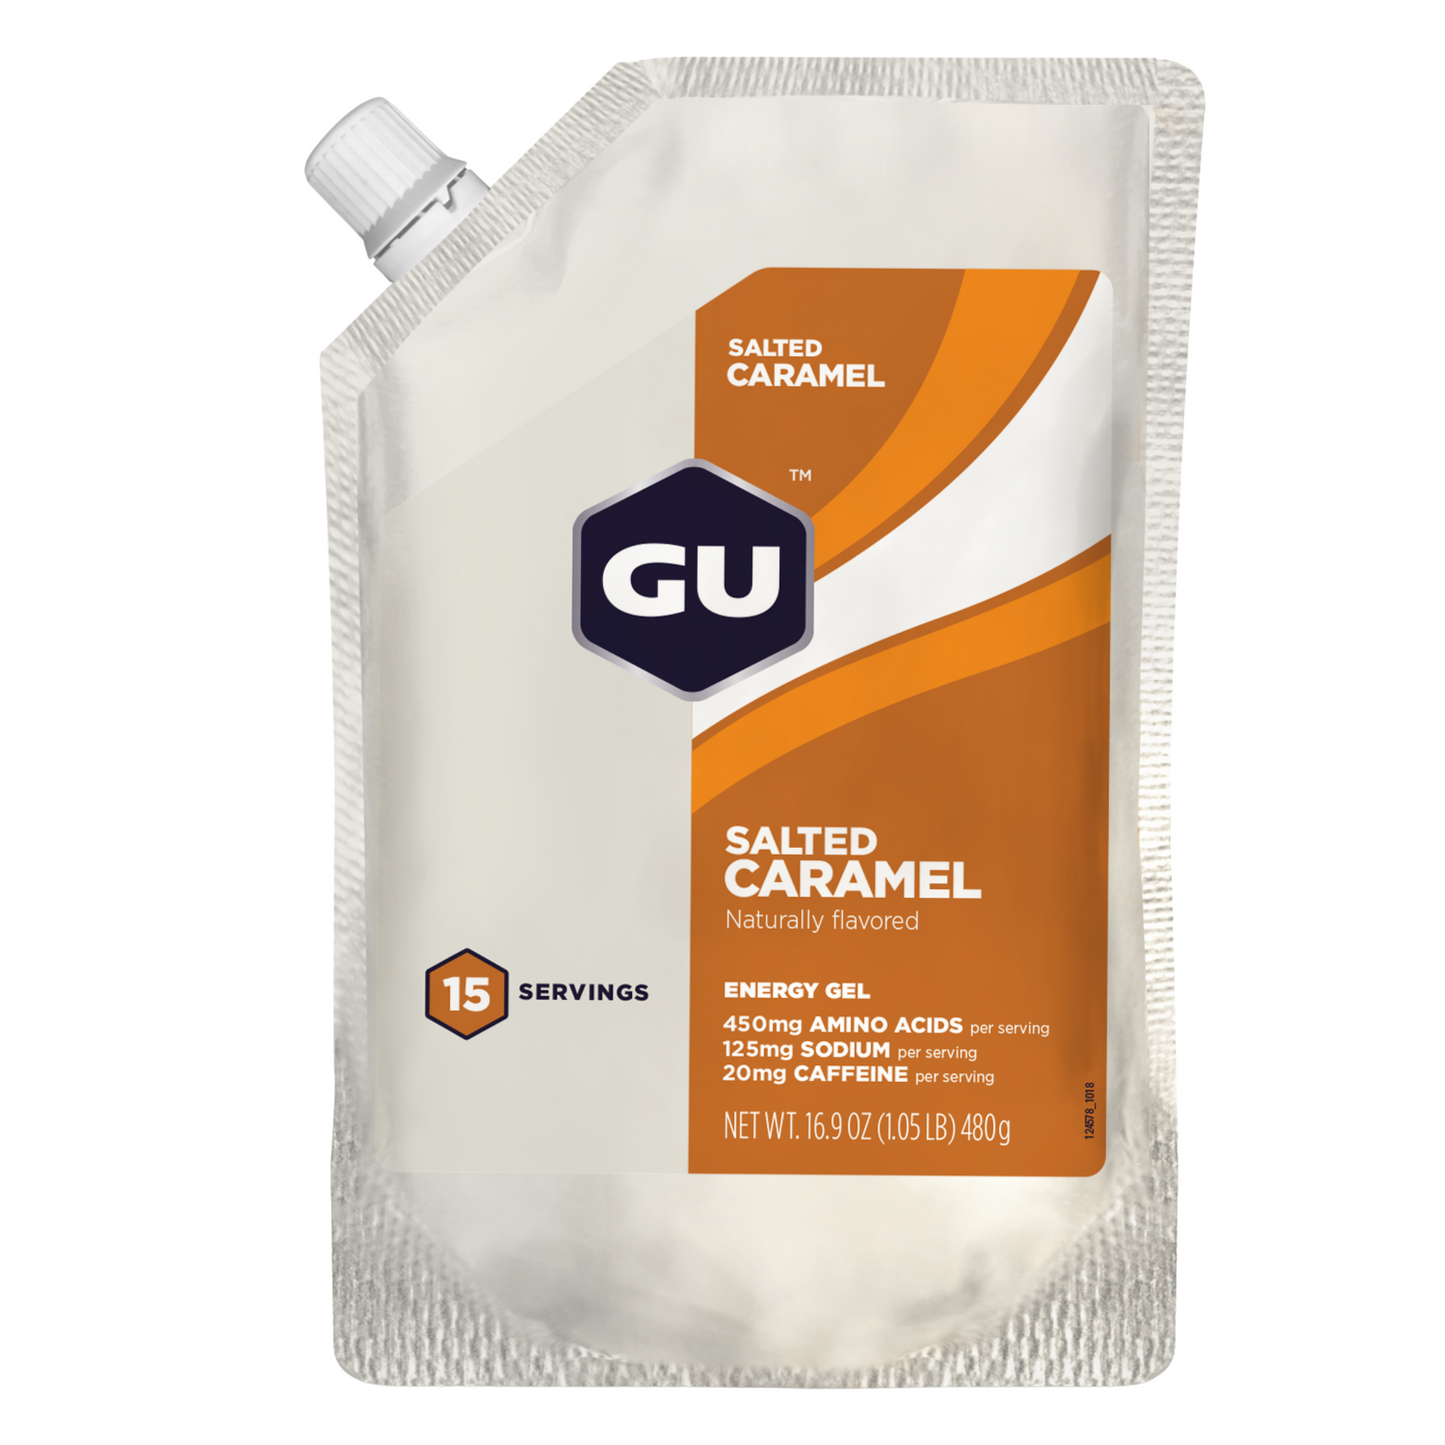 Salted Caramel Energy Gel 15 serving pouch